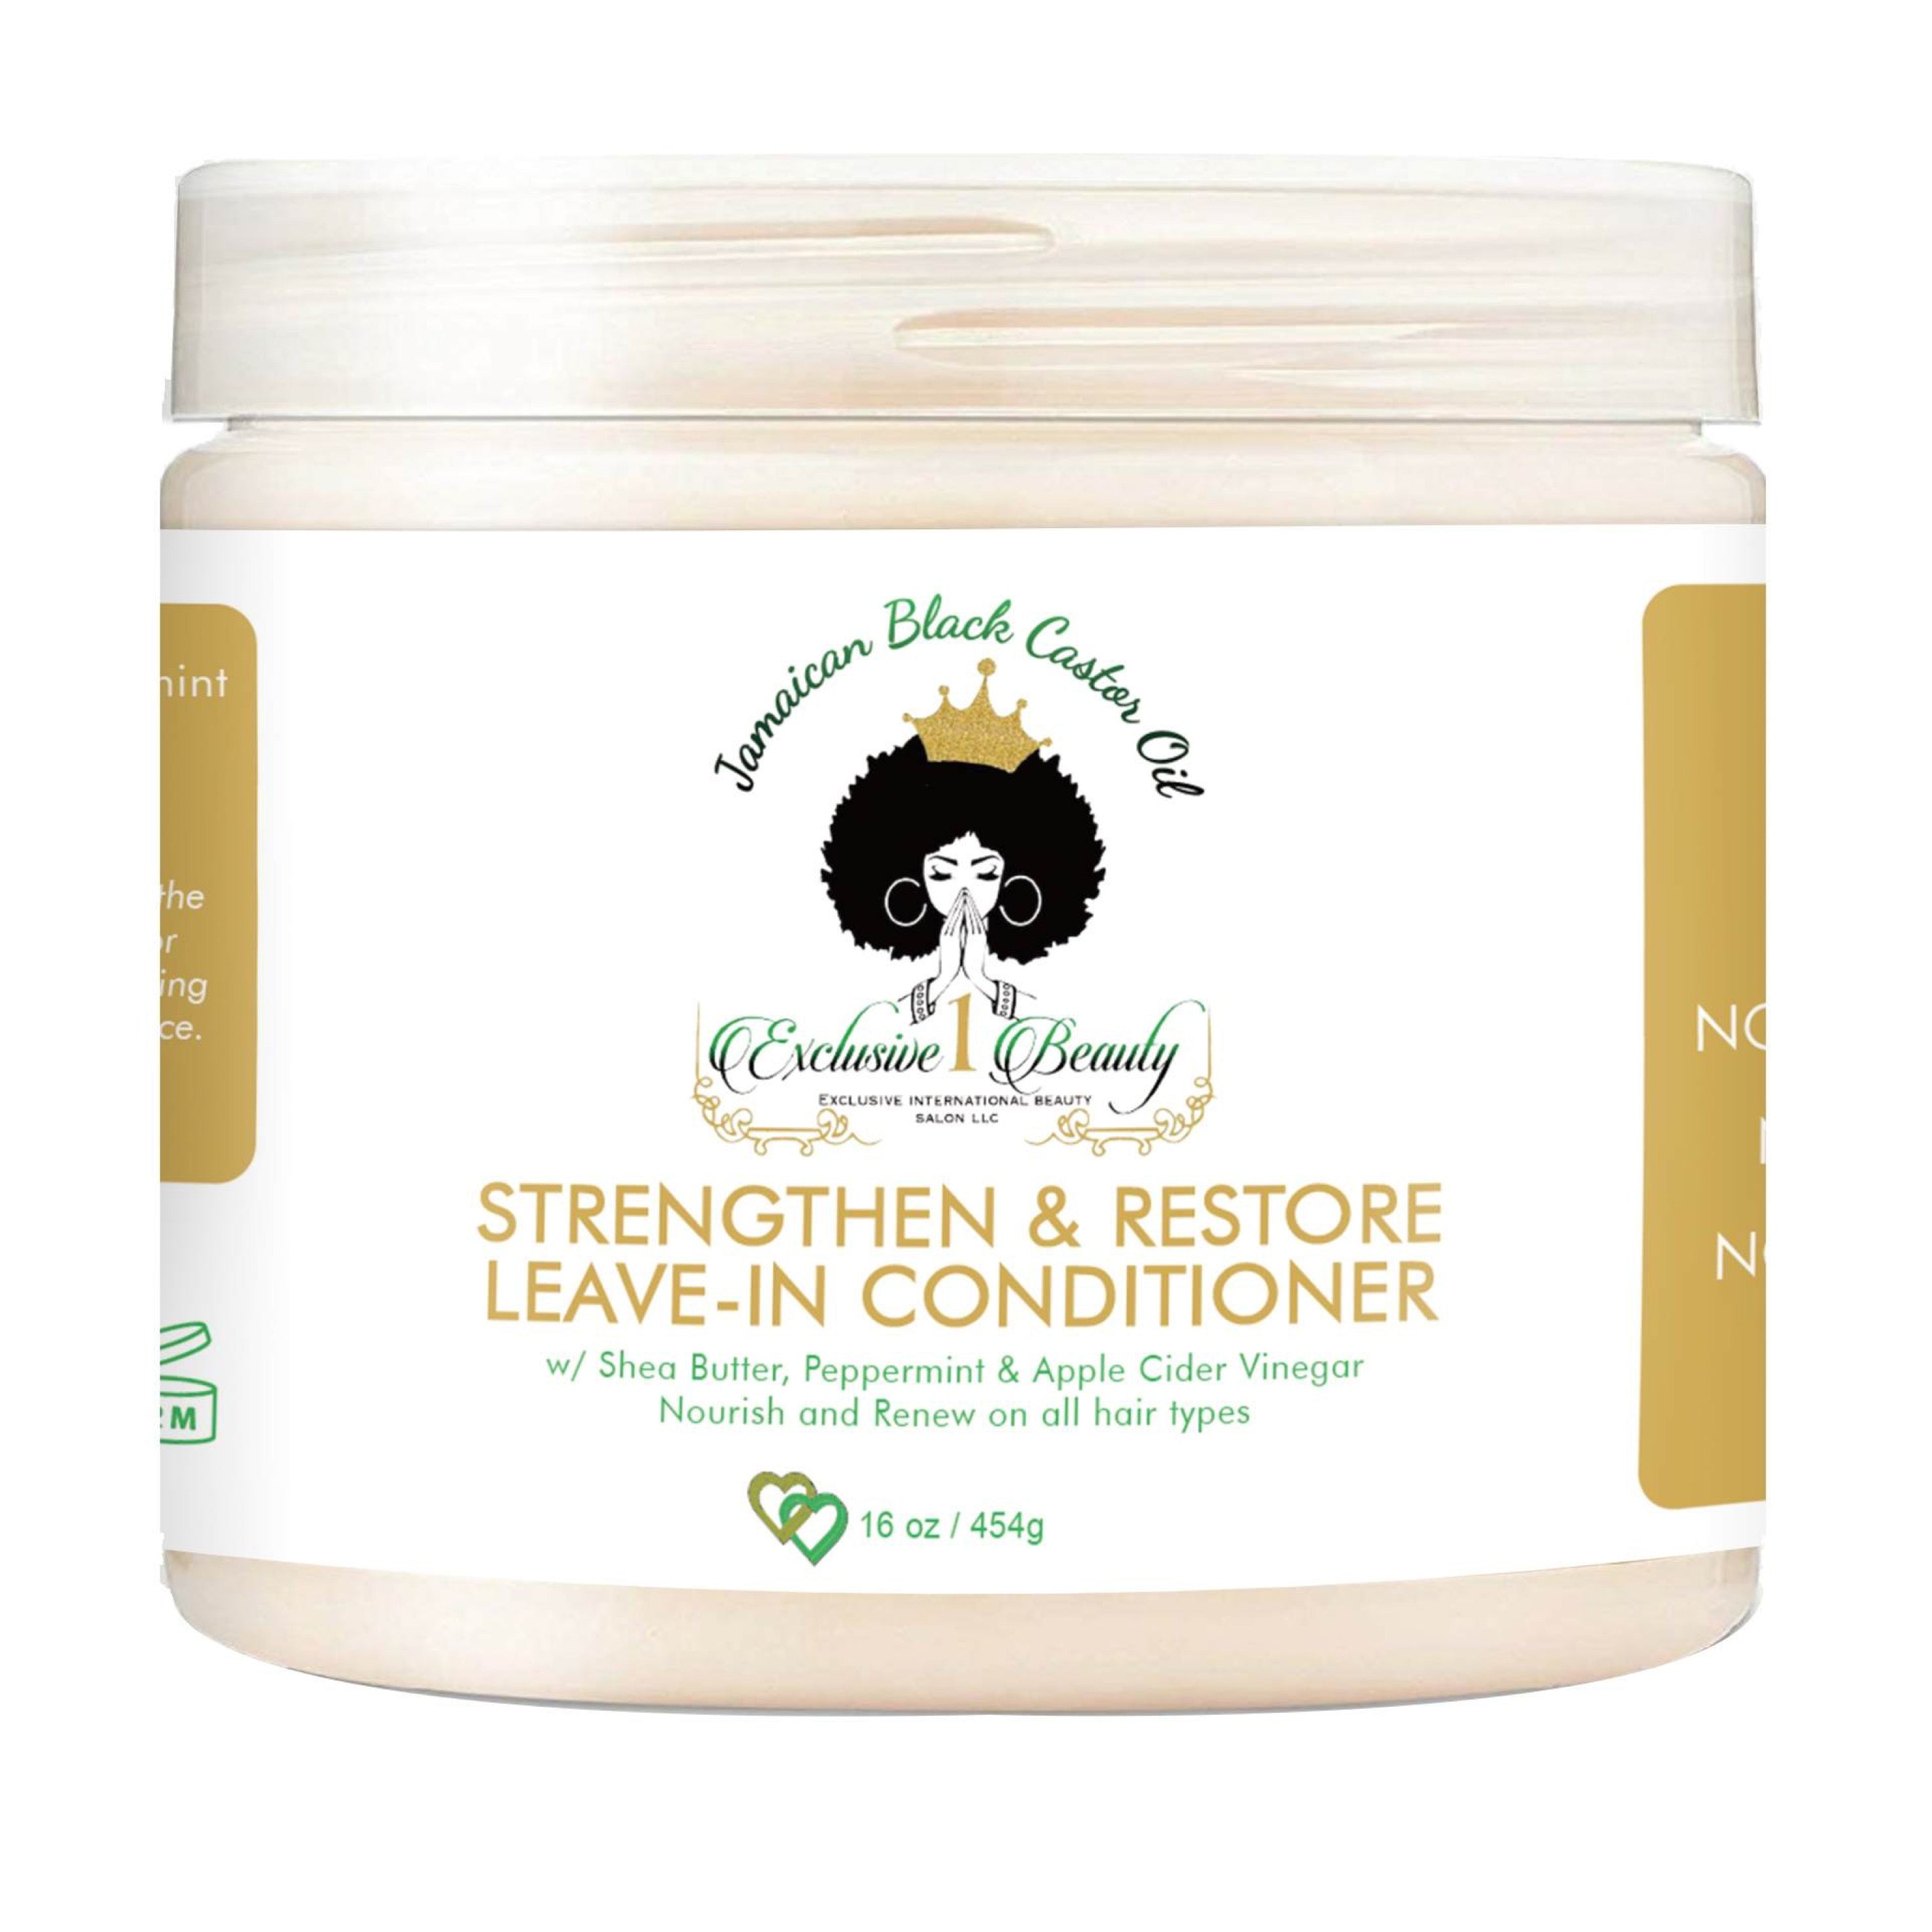 STRENGTHEN & RESTORE KIDS LEAVE-IN CONDITIONER shea butter, peppermint & apple cider vinegar nourish and renew on all hair types.